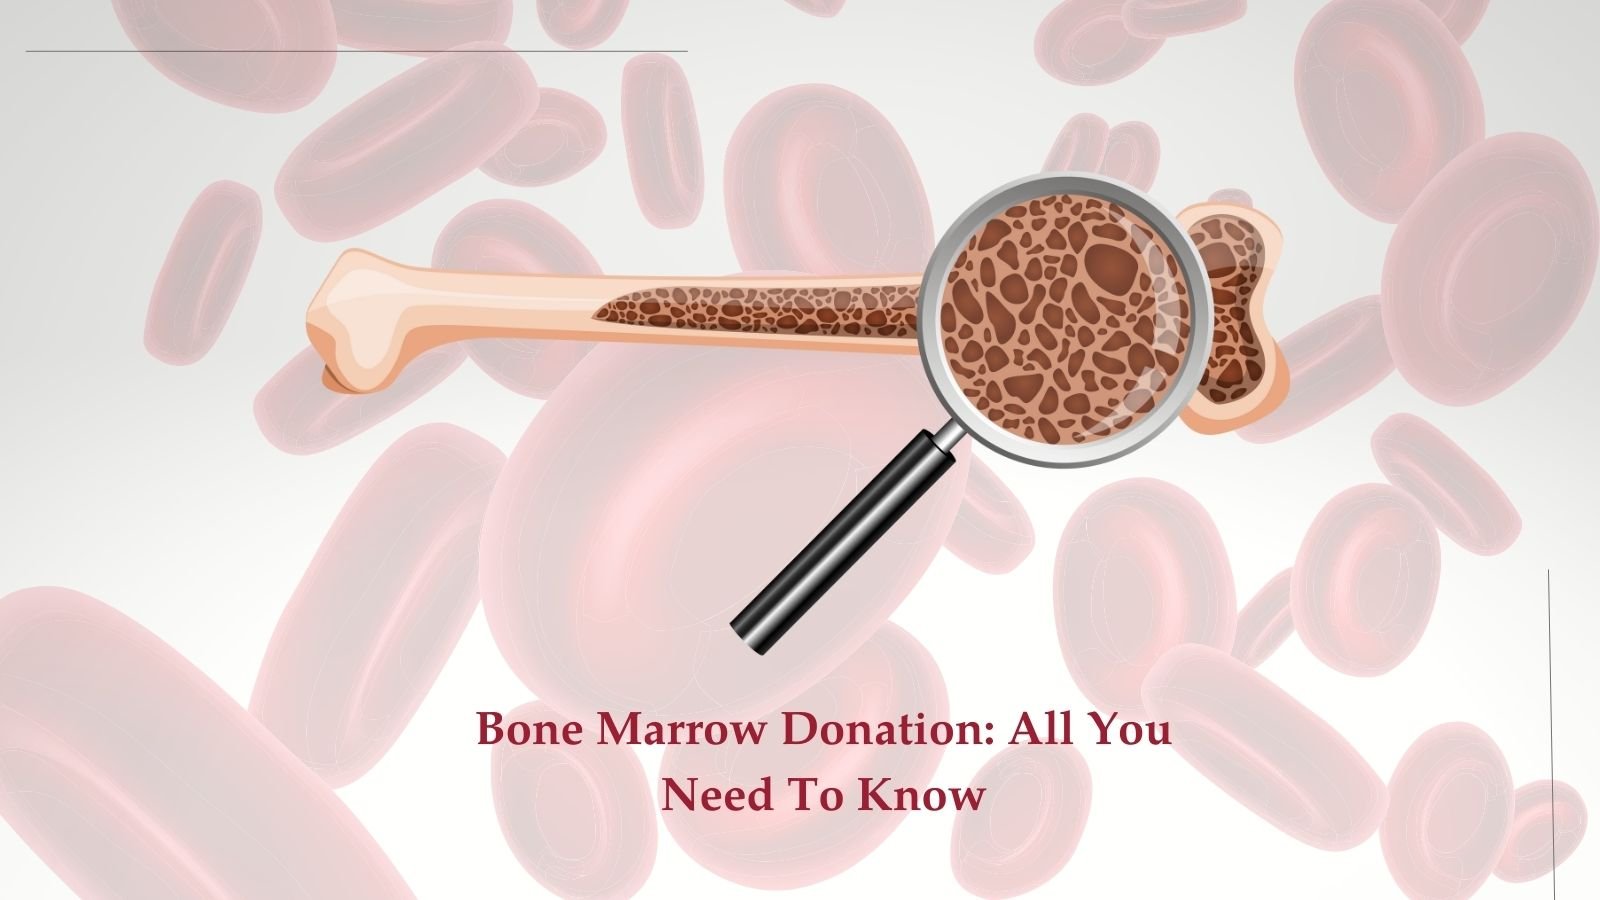 Bone Marrow Donation: All You Need To Know